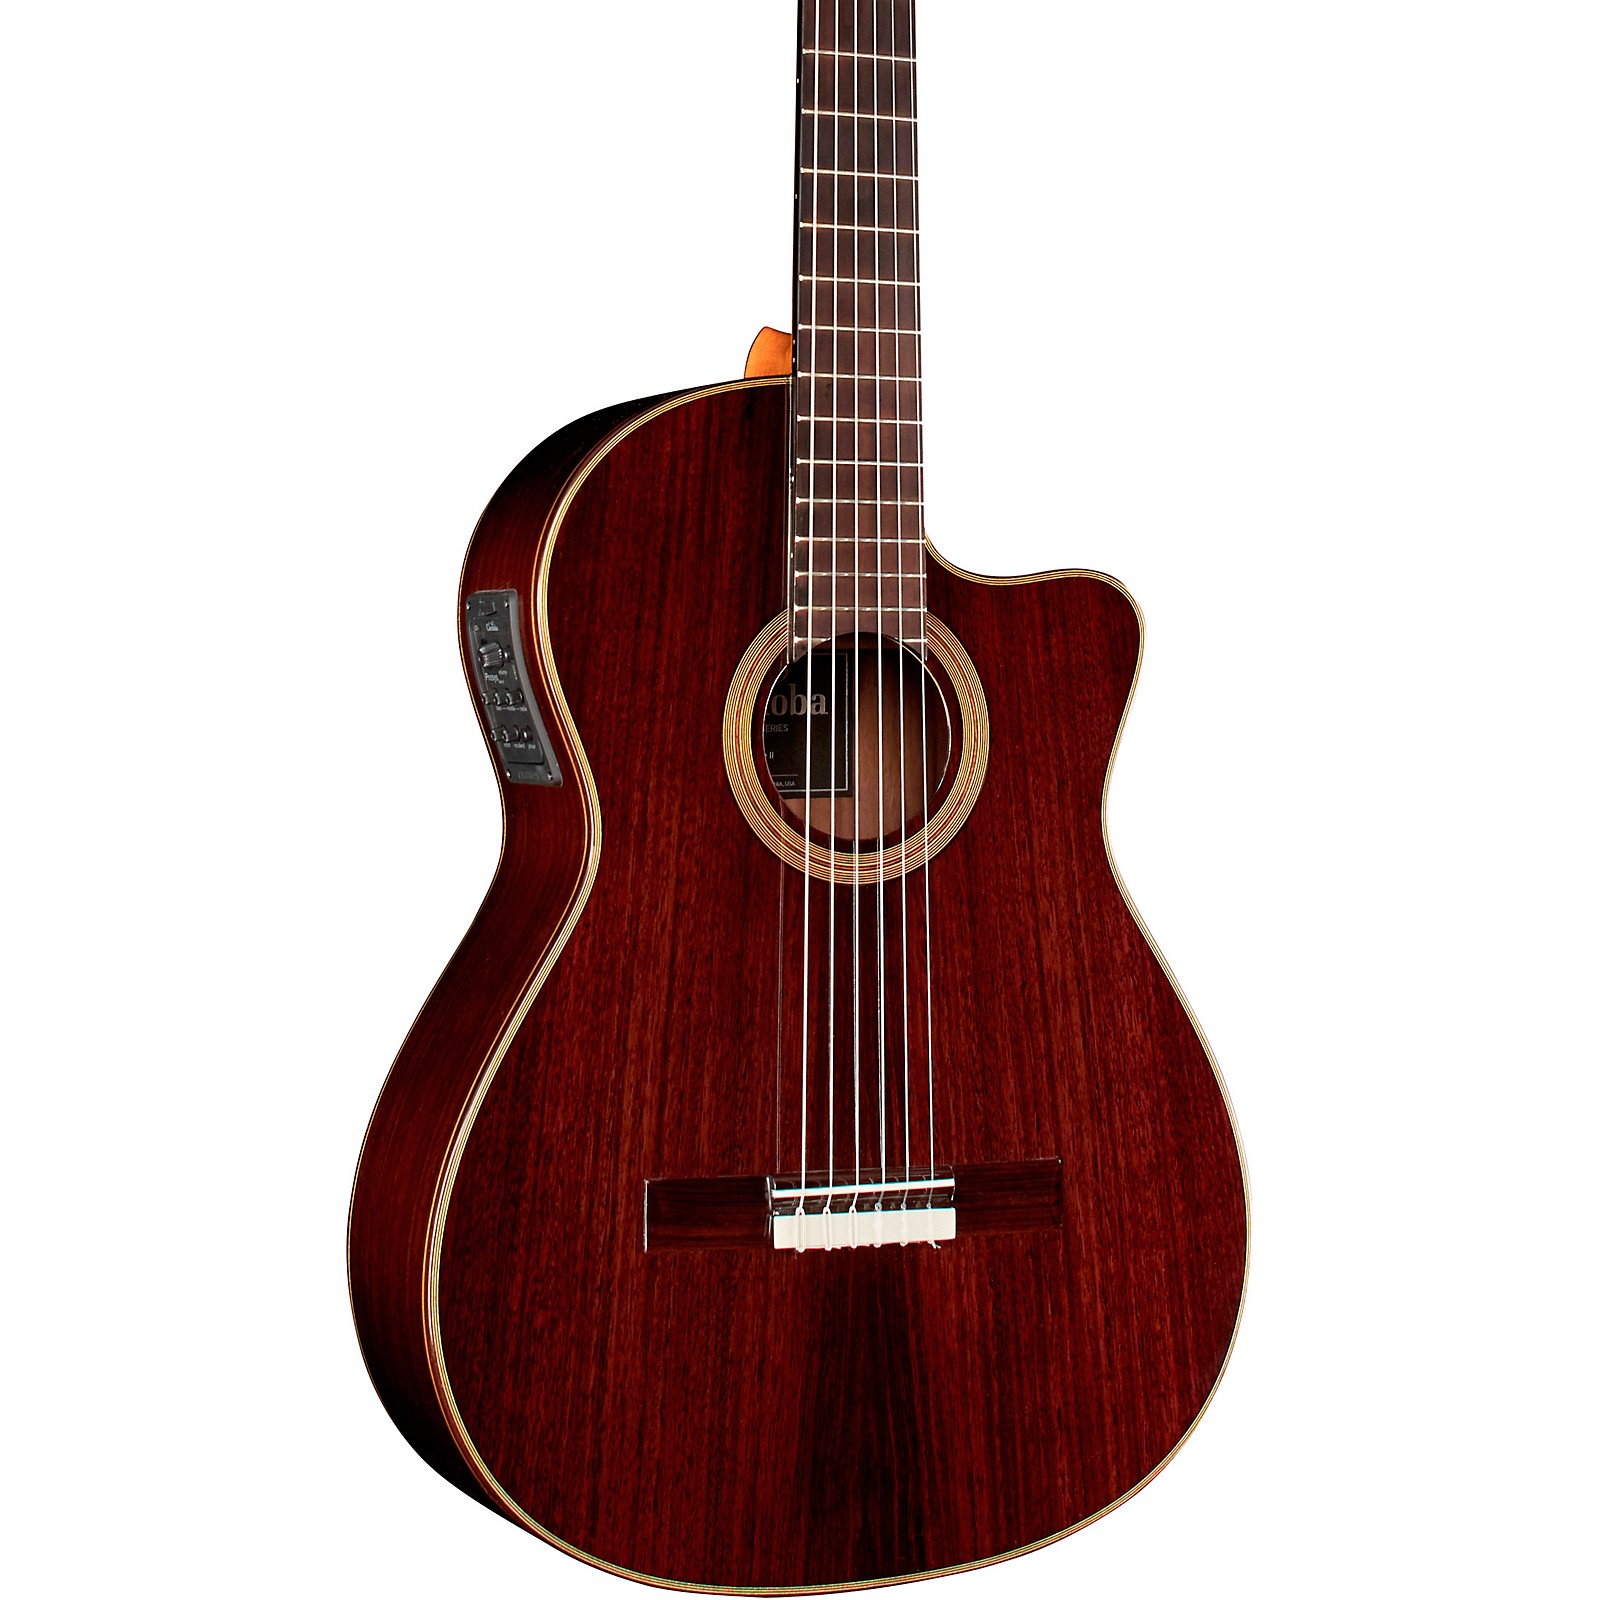 The Perfect Nylon String for Acoustic Guitar Players? - Cordoba Fusion  Series 